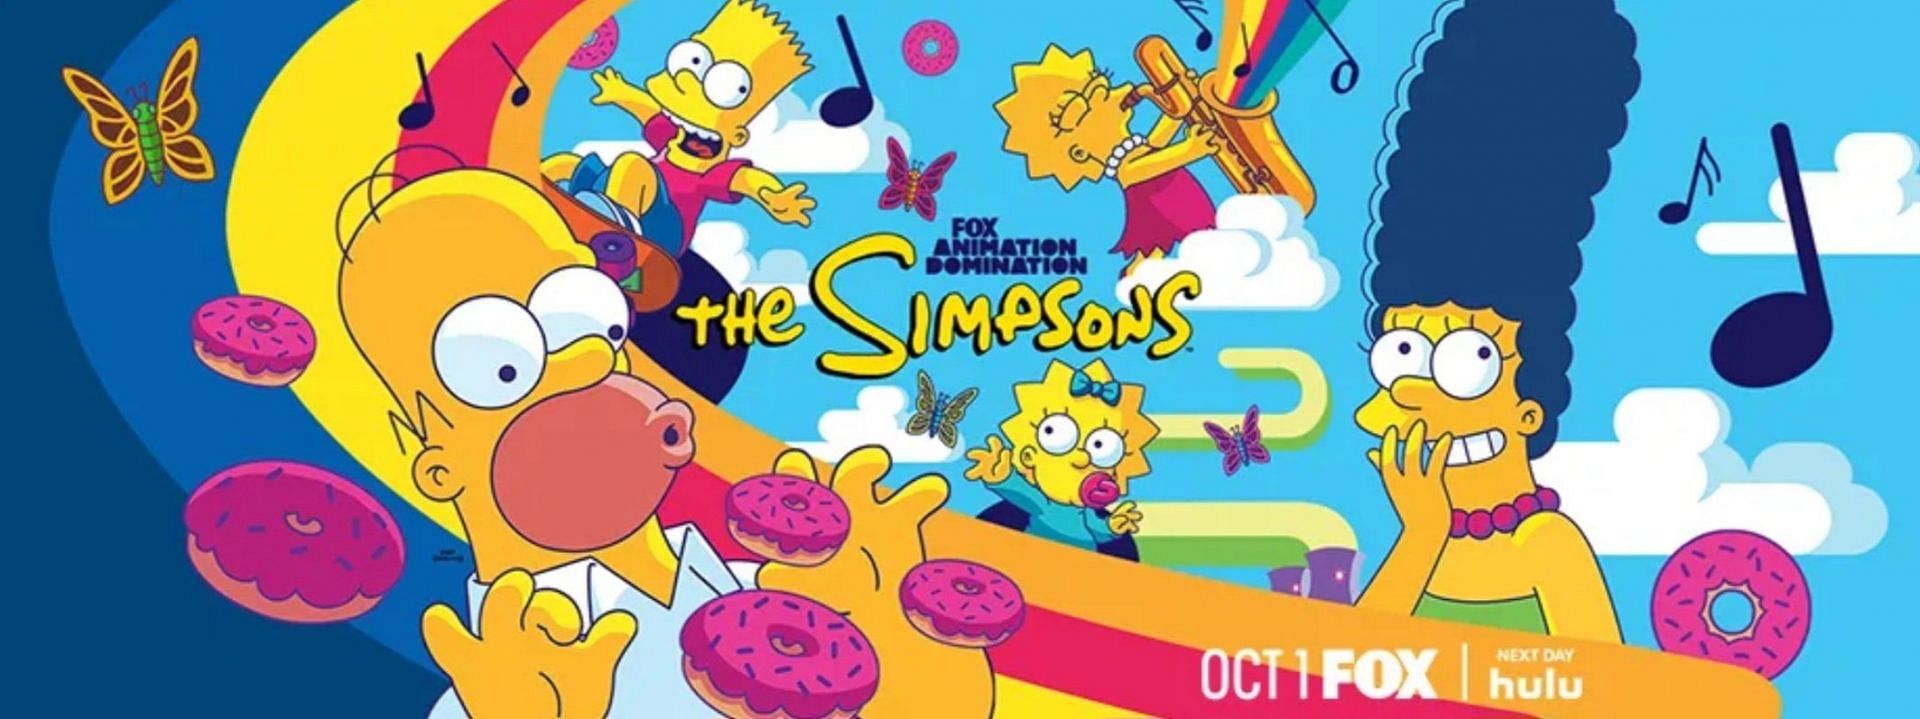 Nope, The Simpsons isn't going anywhere (Image via Fox)